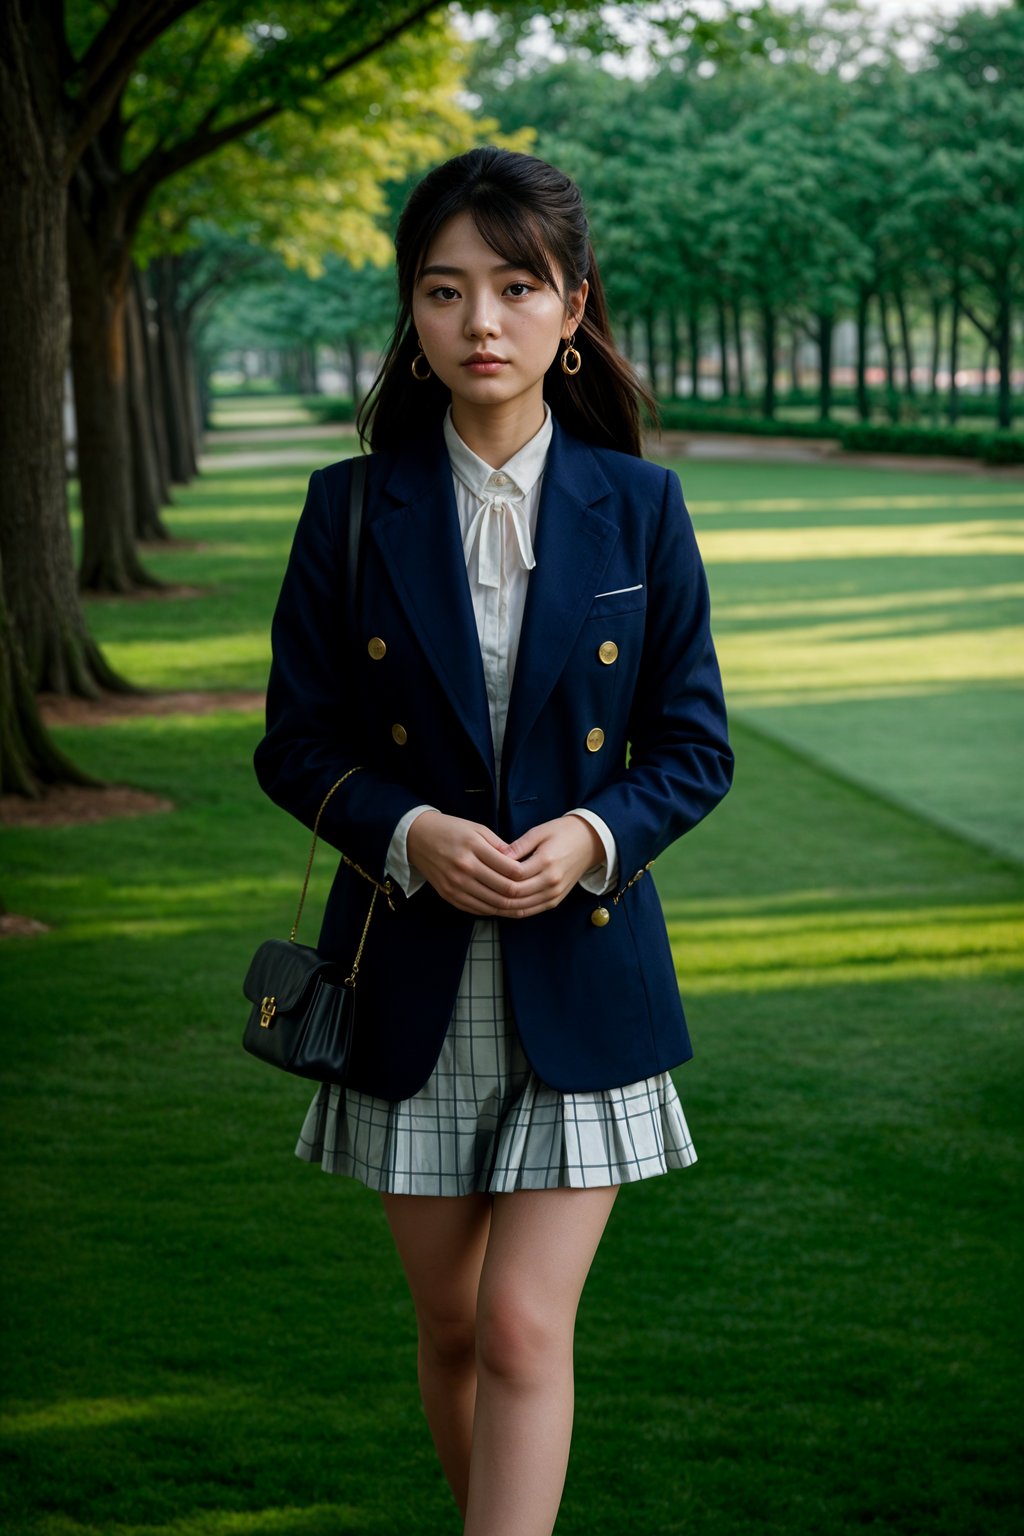 a woman in preppy style, old money aesthetic, posh style, elite school stlye, luxurious style, gossip girl neo-prep style, ralph lauren style, country club style, ivy league style